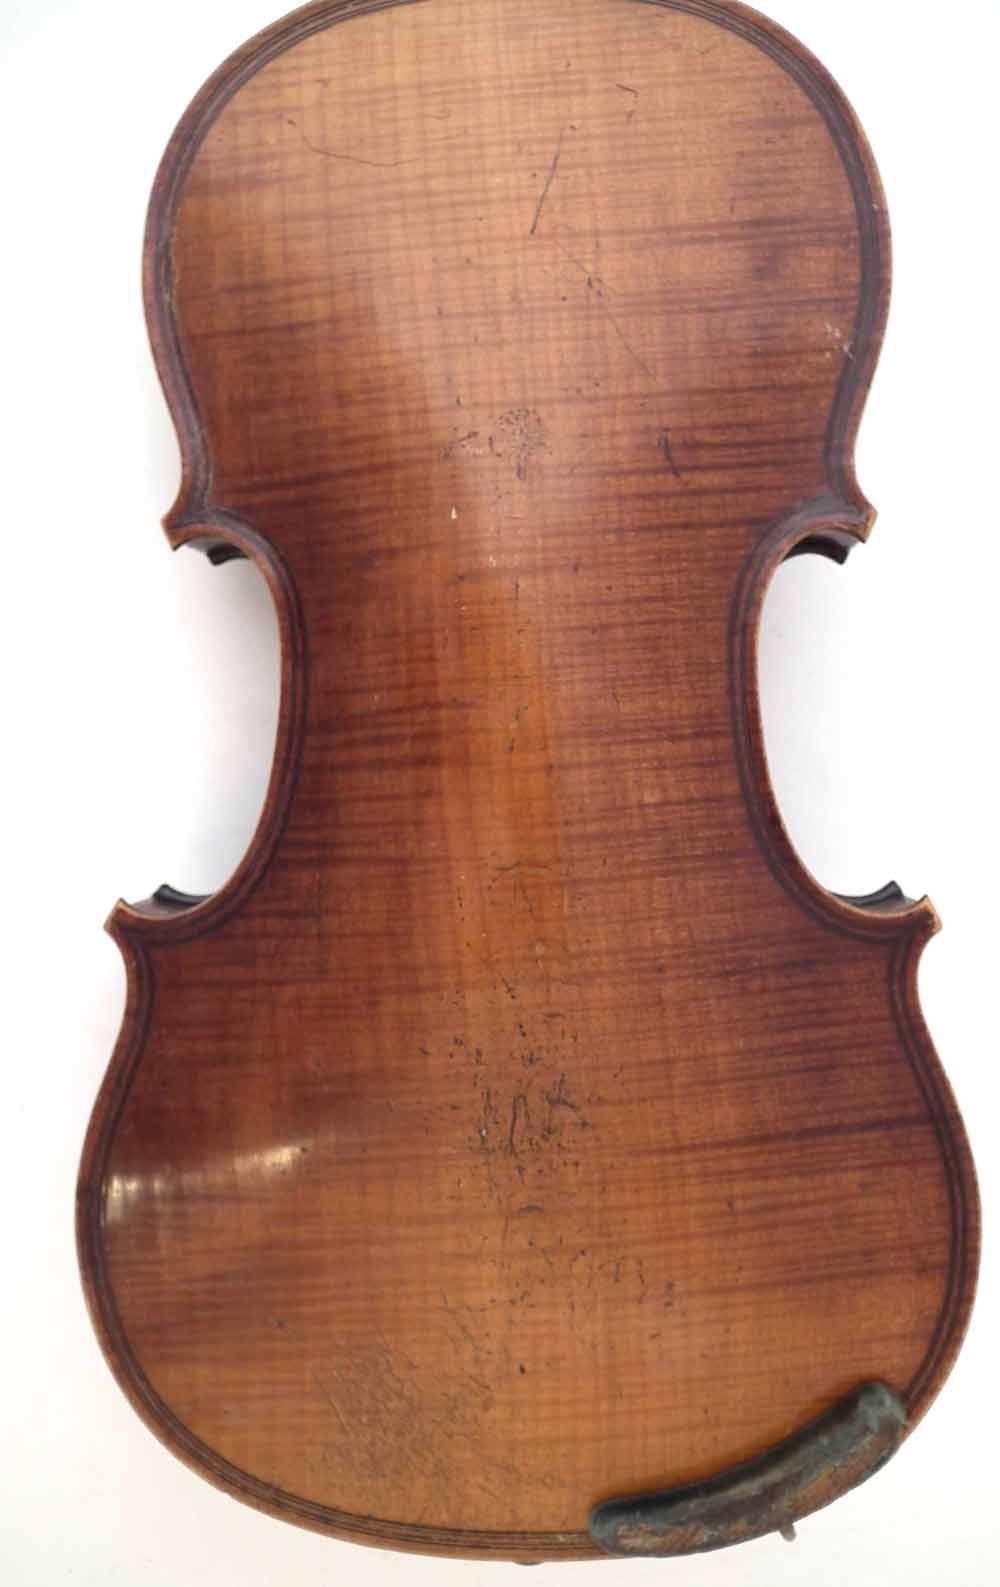 Violin in the style of Gaspar da Salo, with one piece tightly flamed back, double line purfling, - Image 11 of 17